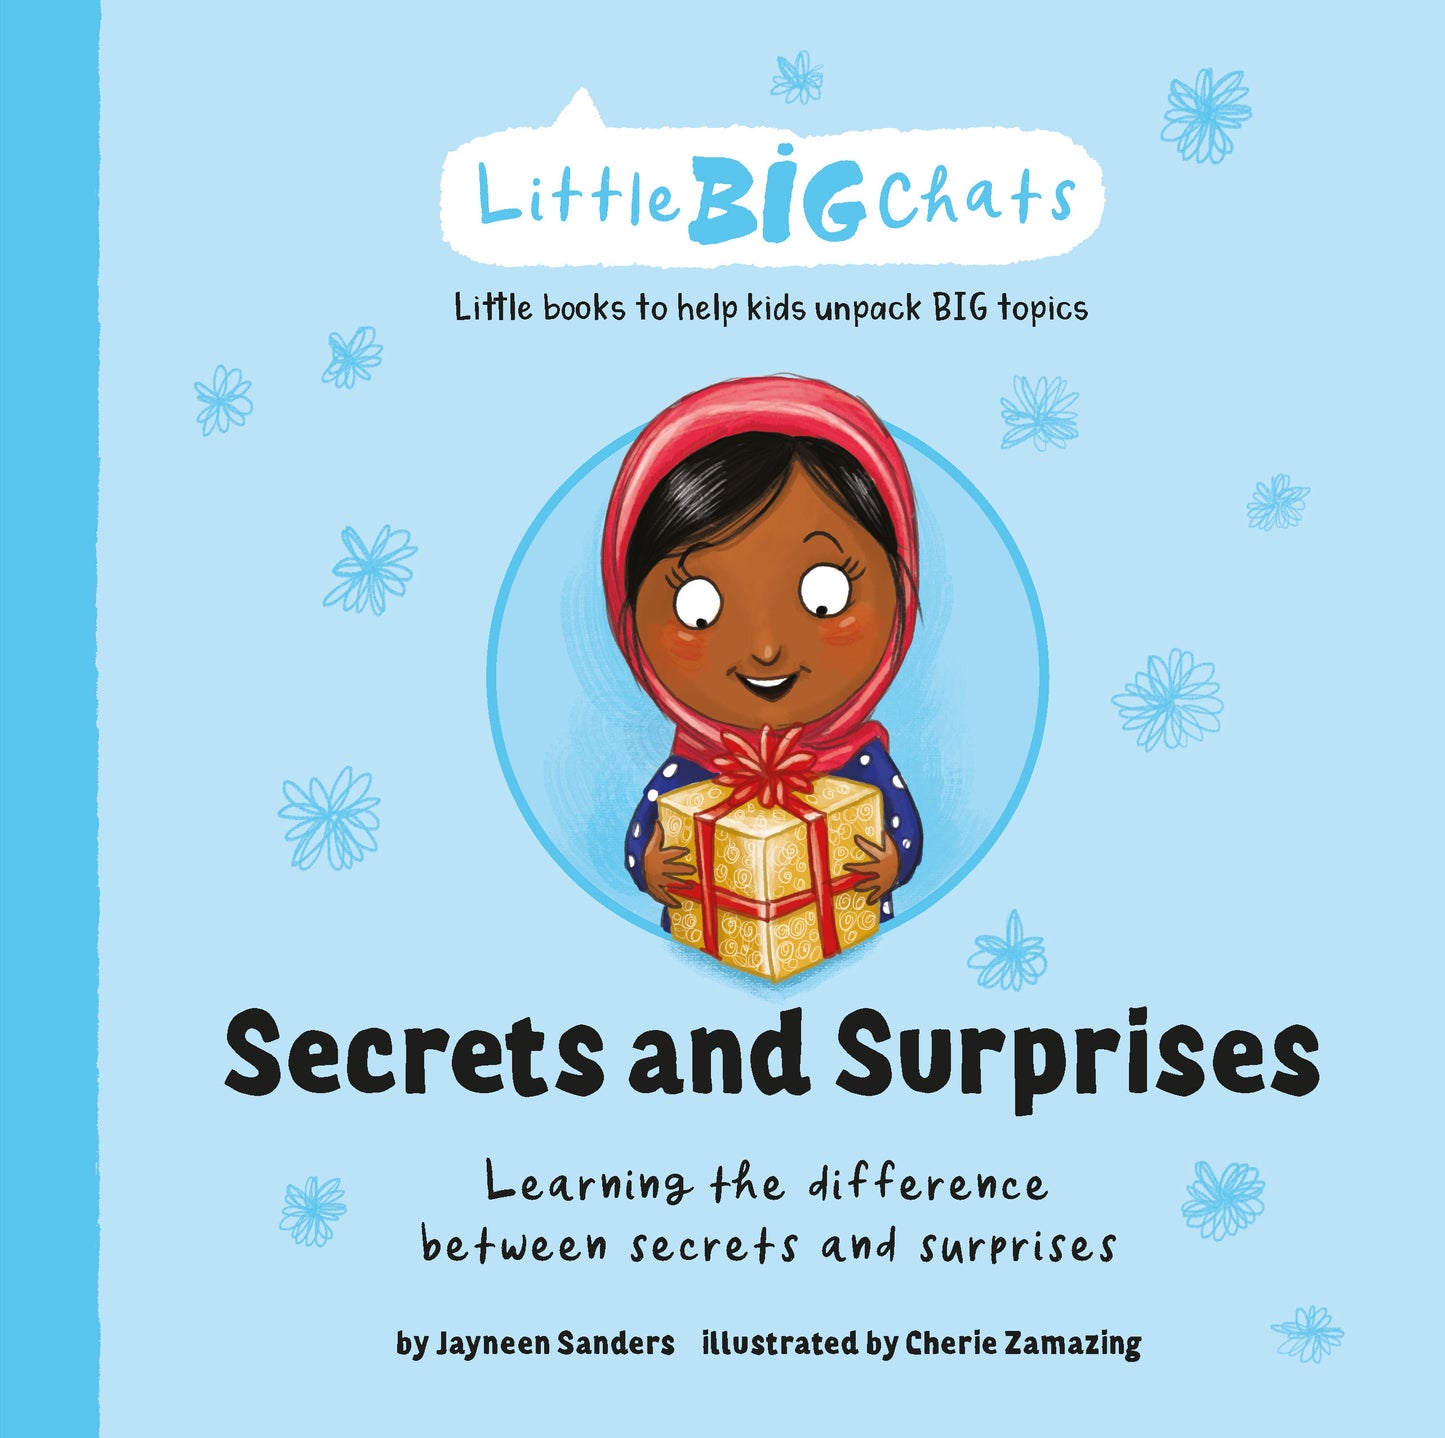 Little BIG Chats - Complete Bundle *PREORDER* (expected within 1-2 weeks)